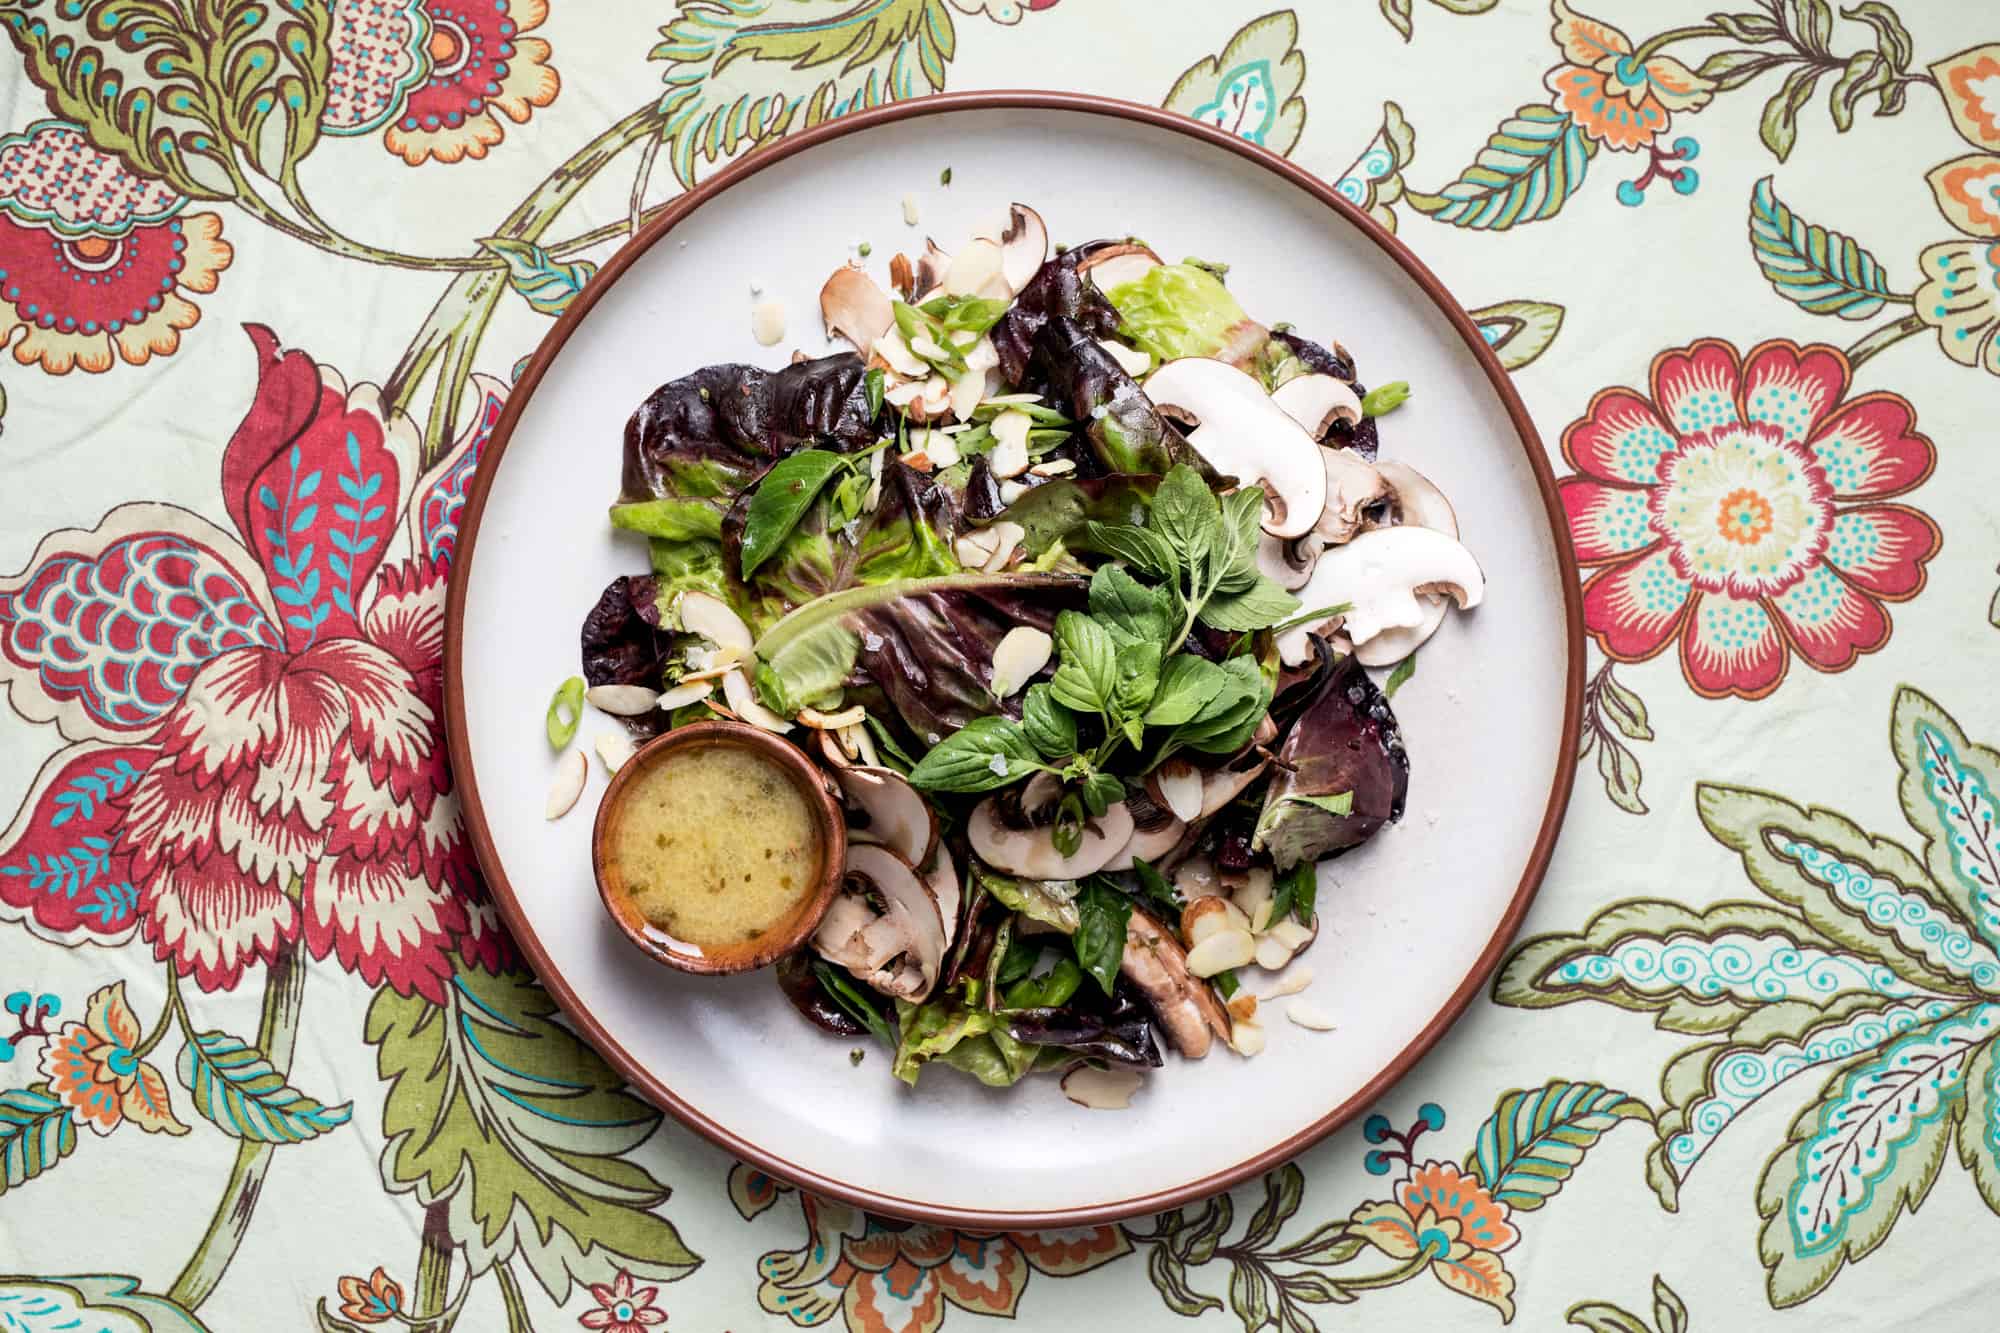 Salad with mushrooms and butter lettuce on a white plate and a floral tablecloth with mustard vinaigrette